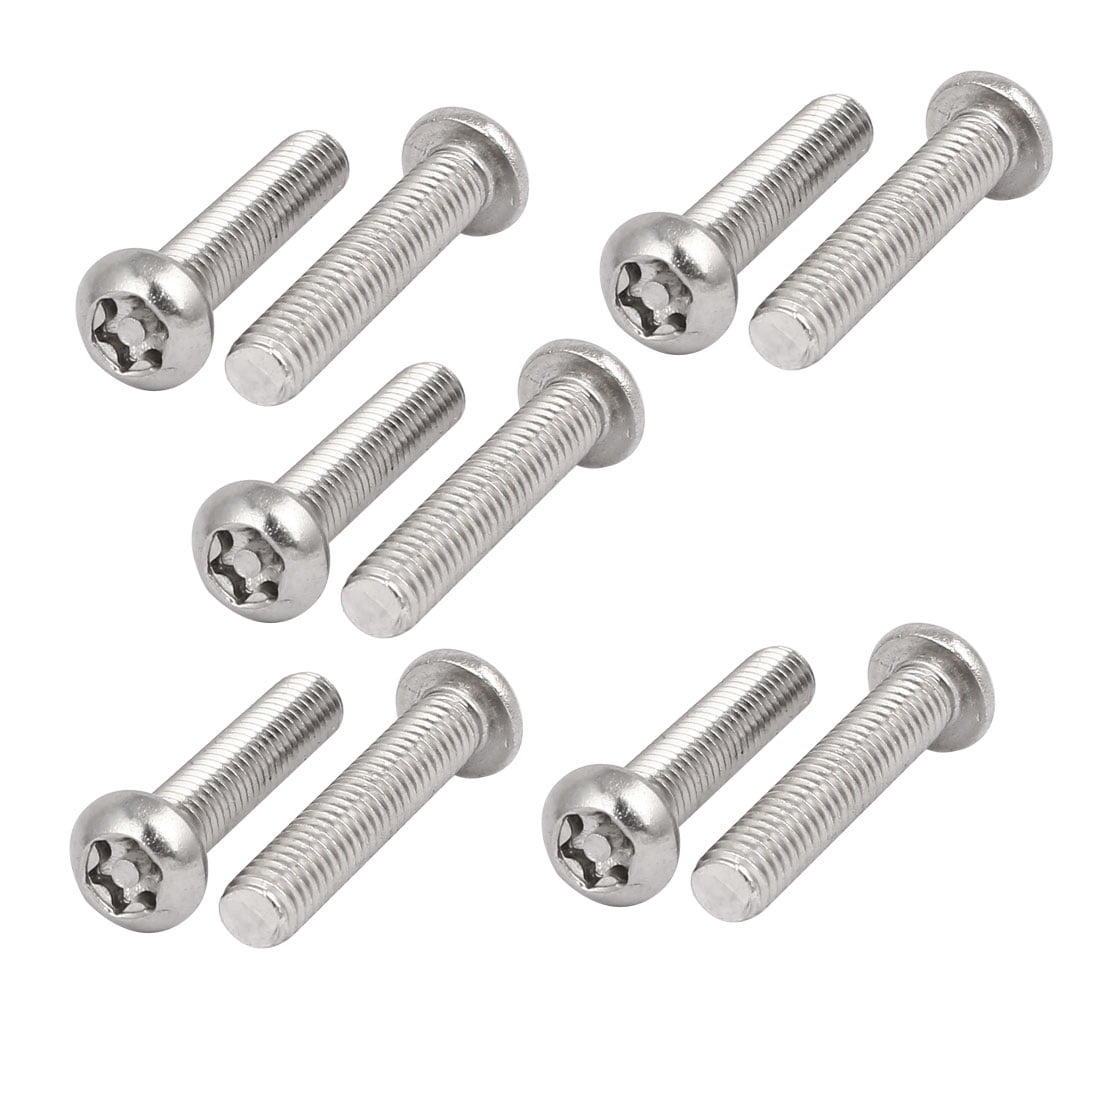 Qty 20 Countersunk Post Torx M6 x 25mm Stainless T30 Security Screw Tamperproof 